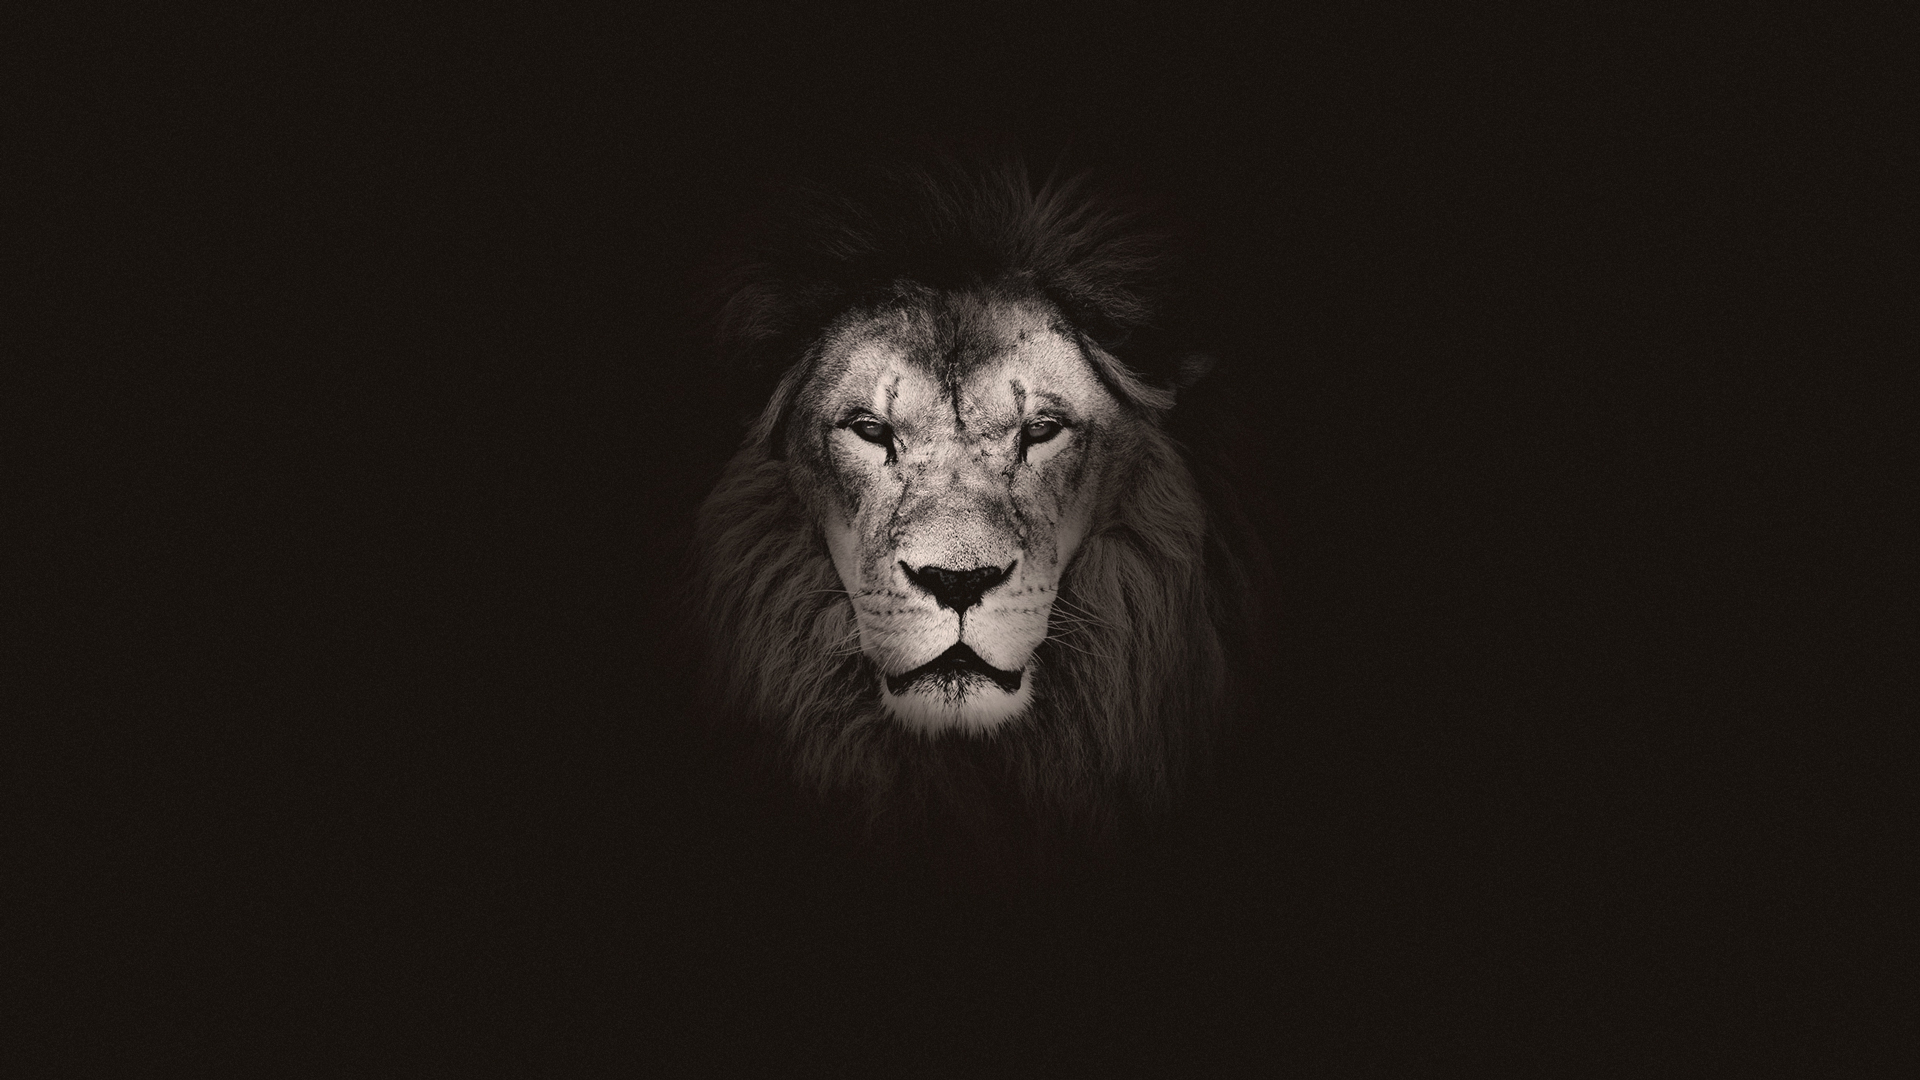 Wednesday Wallpaper: Our God is a Lion - Jacob Abshire